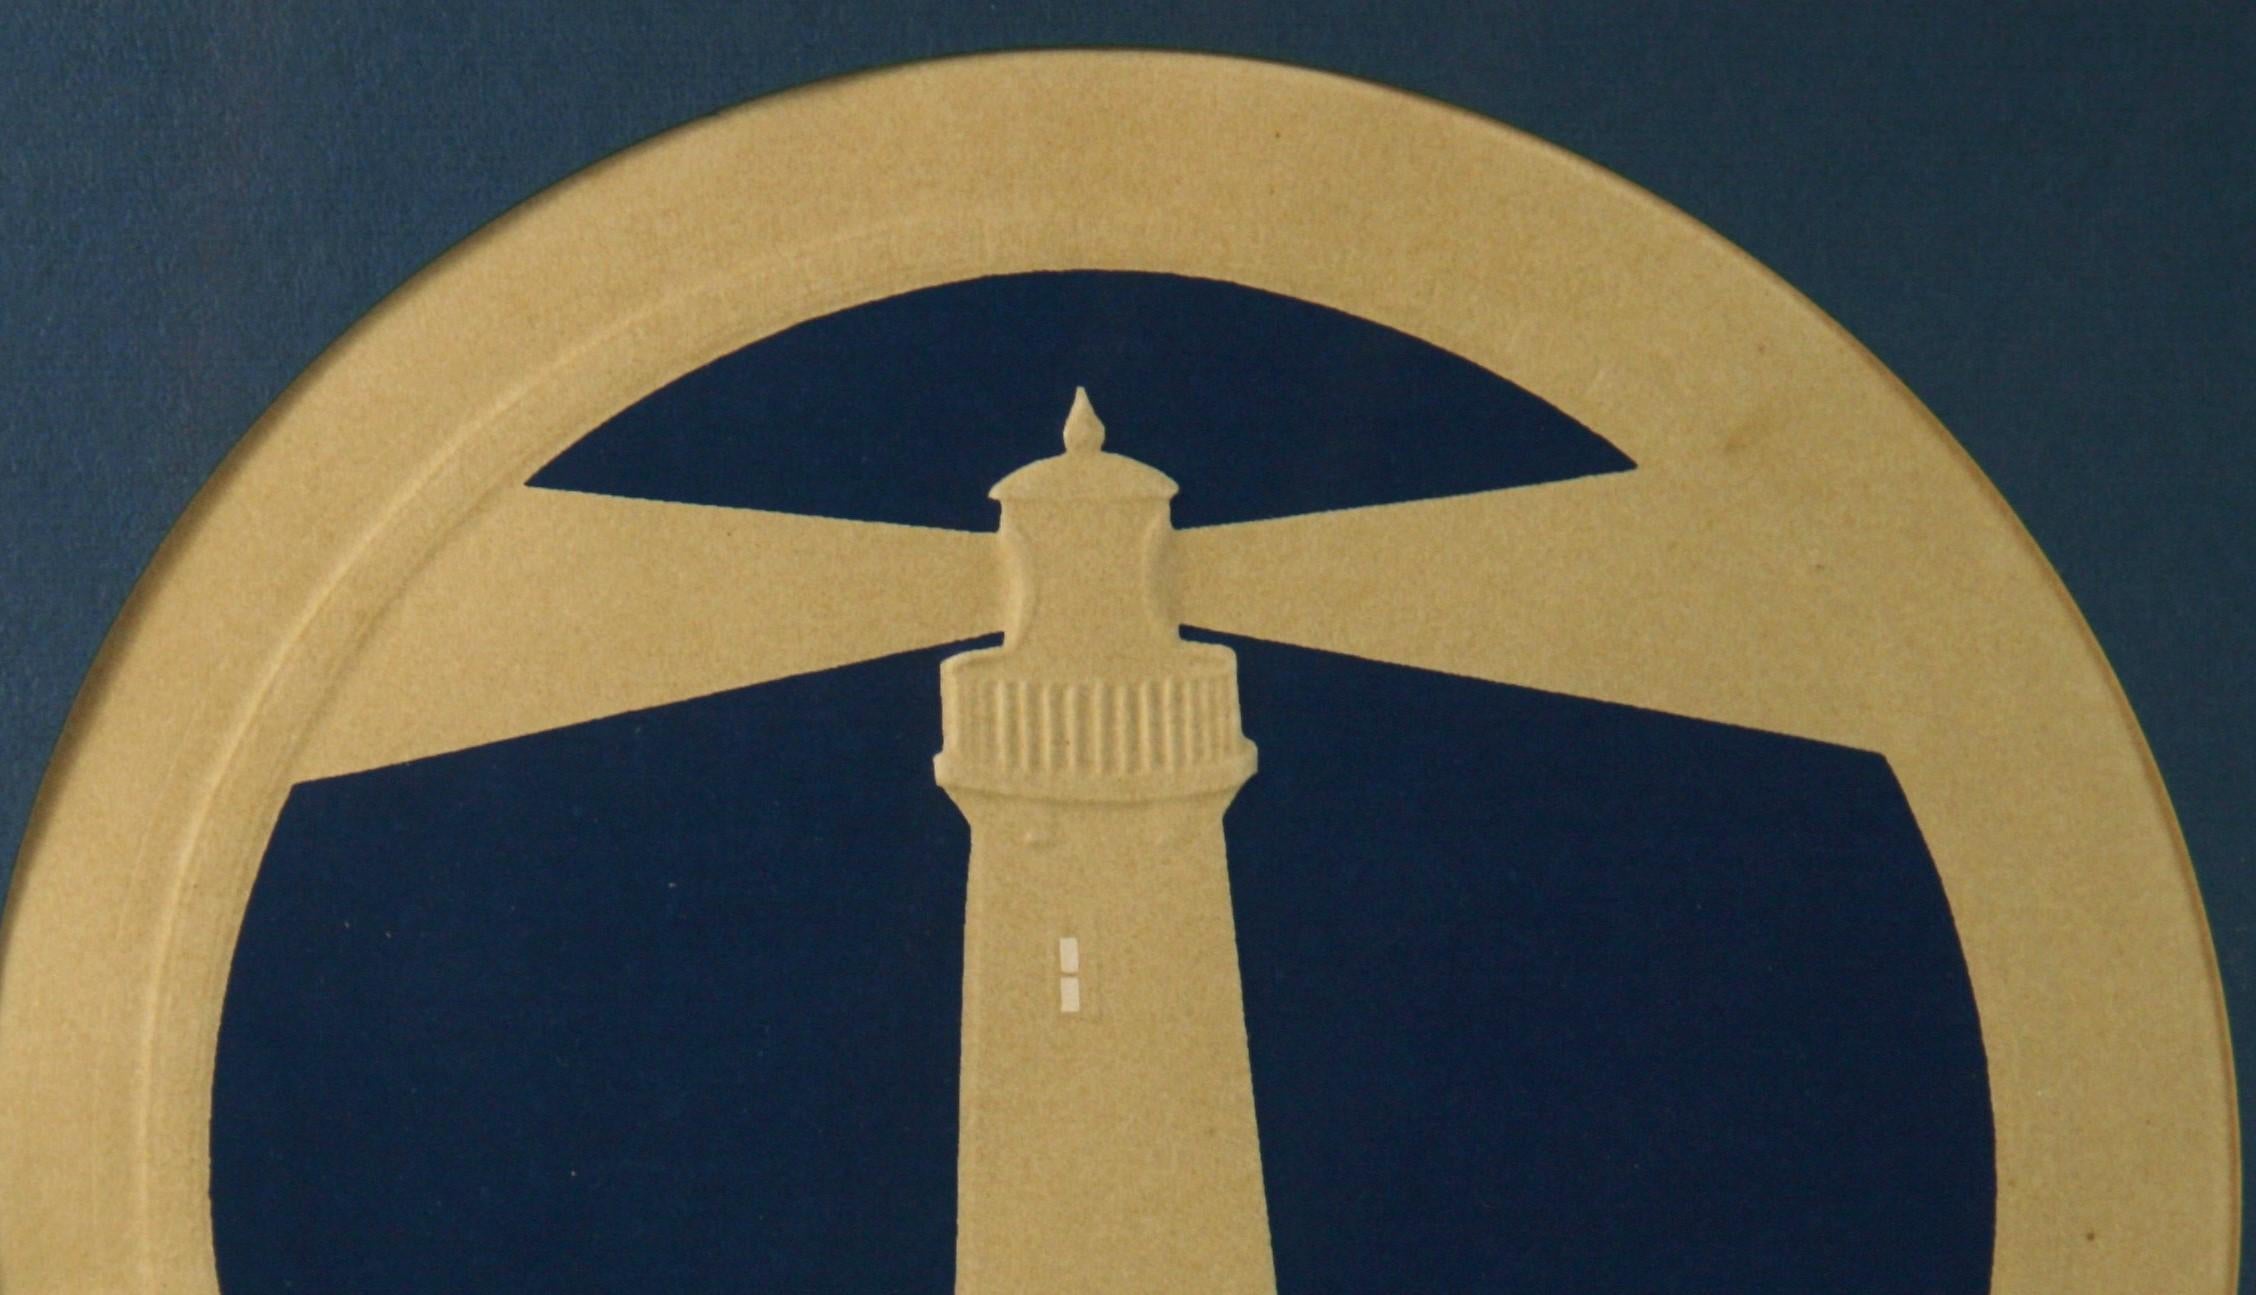 3984 Modern nautical lighthouse on embossed paper set in a brass covered wood frame
Also available nautical anchor see last photo #3983